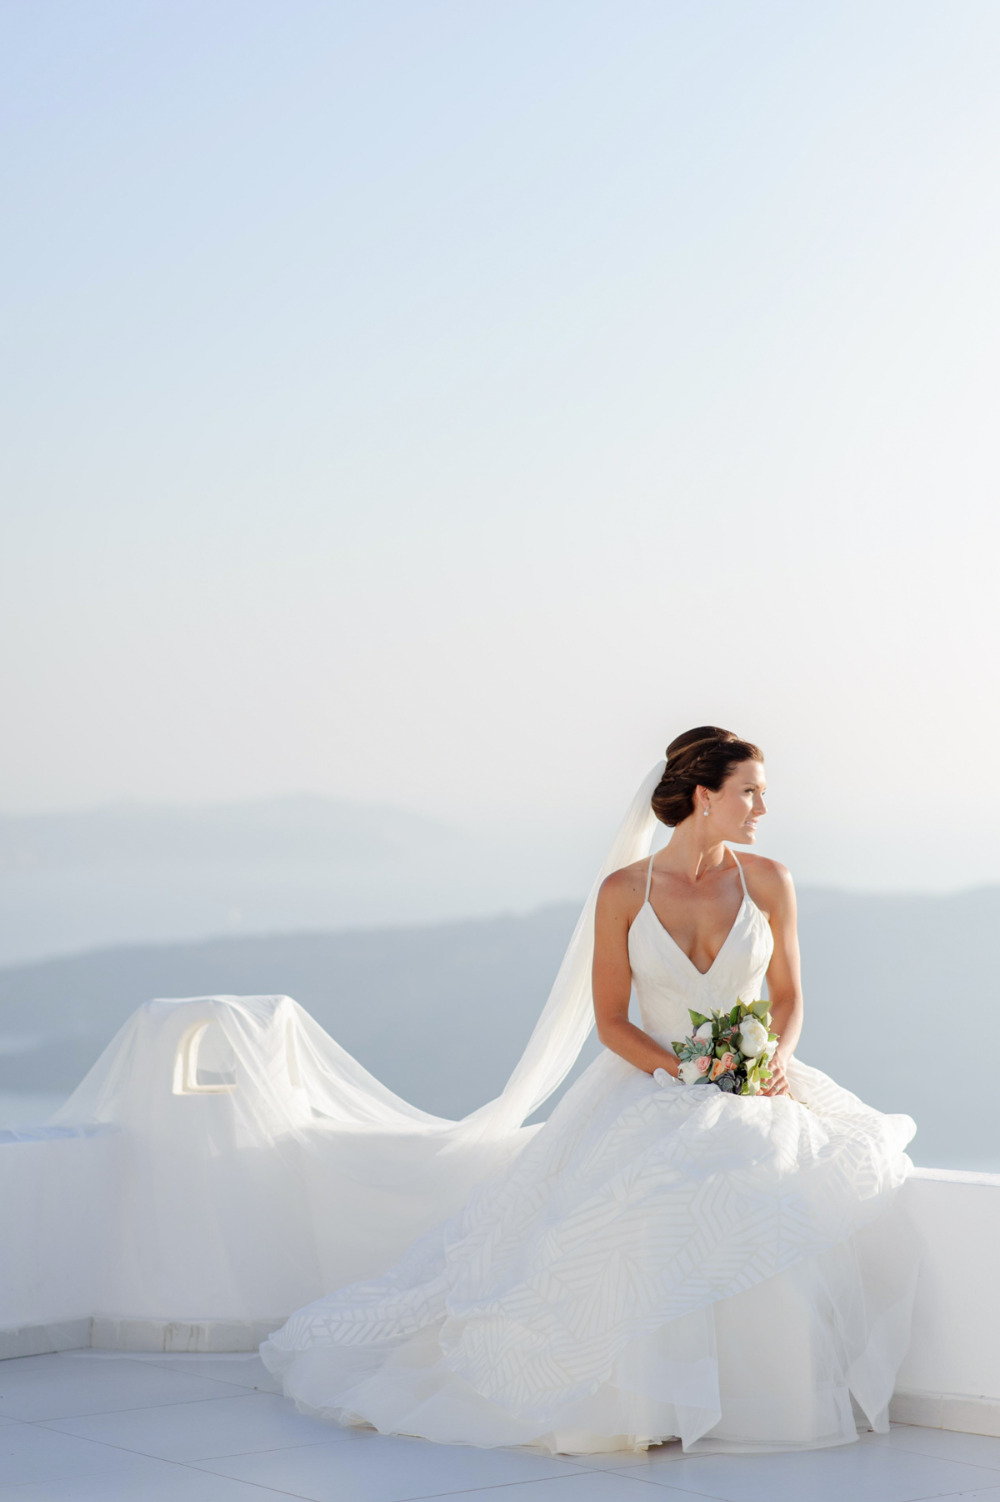 get-hitched-in-santorini-greece-and